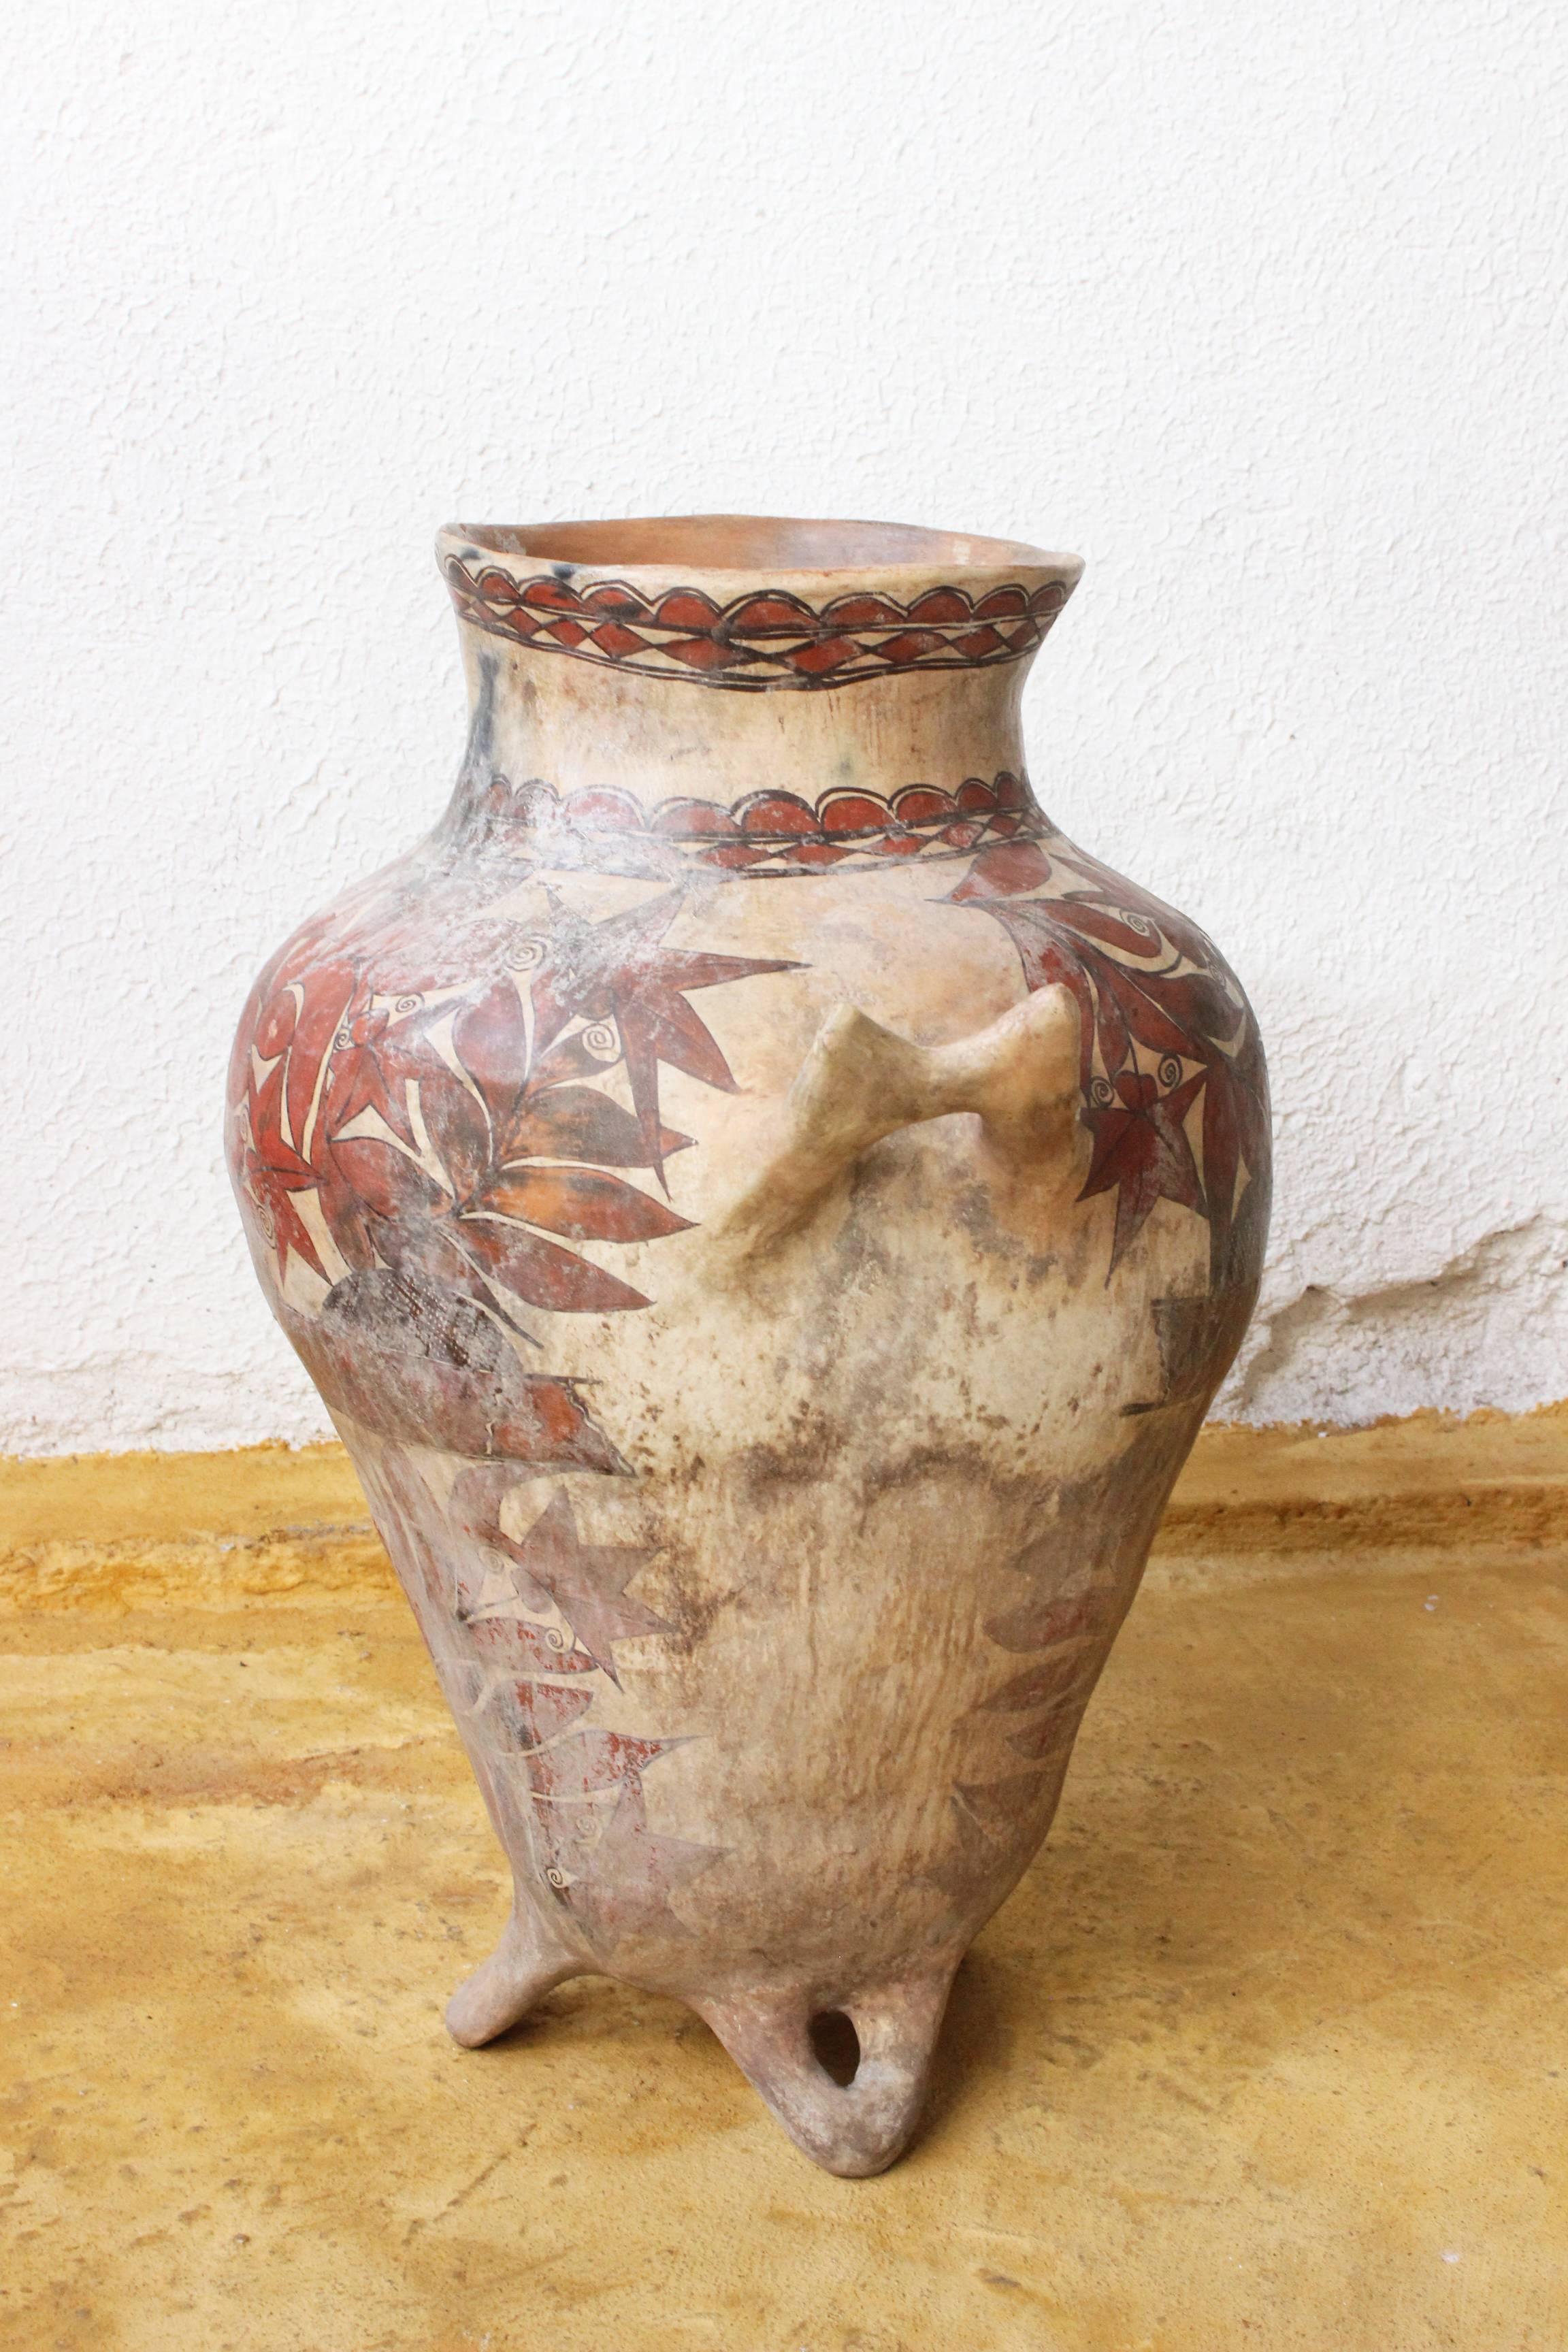 Here is a charming early 20th century ceramic water pot from the Rio Balsas region of Guerrero, Mexico. The pot is painted in the typical style now found on bark (amate) paintings all over Mexico. The bowl may have been made in Oapan or